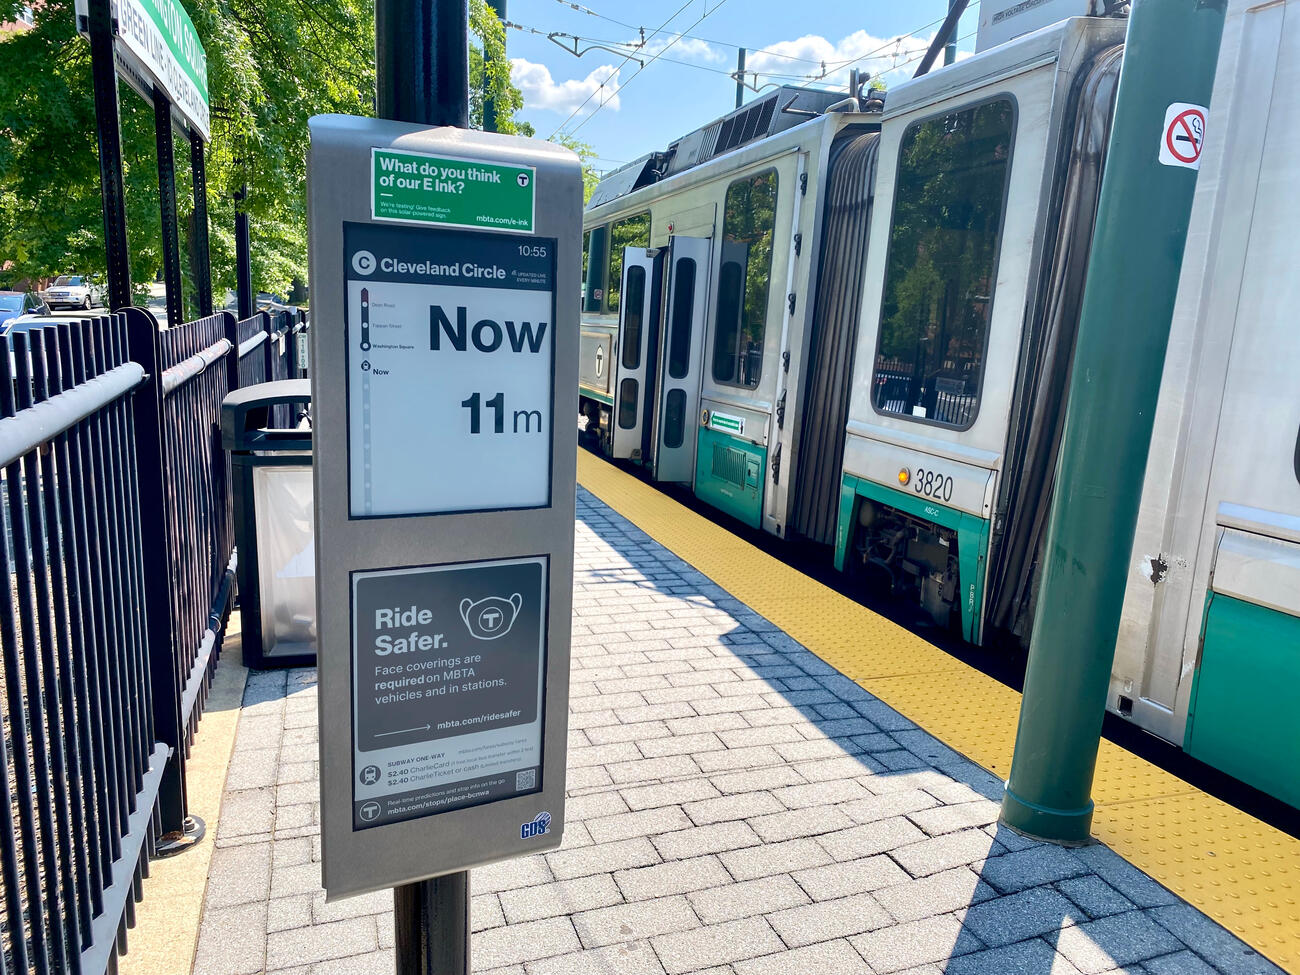 At left is an E Ink solar-powered digital sign at the Washington Square trolley stop on the Green Line's C Branch. The E Ink sign shows the time (10:55) and the destination (Cleveland Circle), and says Now in large letters to show that the trolley is now boarding. Below "Now" the sign says "11 m" to show that the next trolley will arrive in 11 minutes. A Green Line train passes on the tracks at right. 